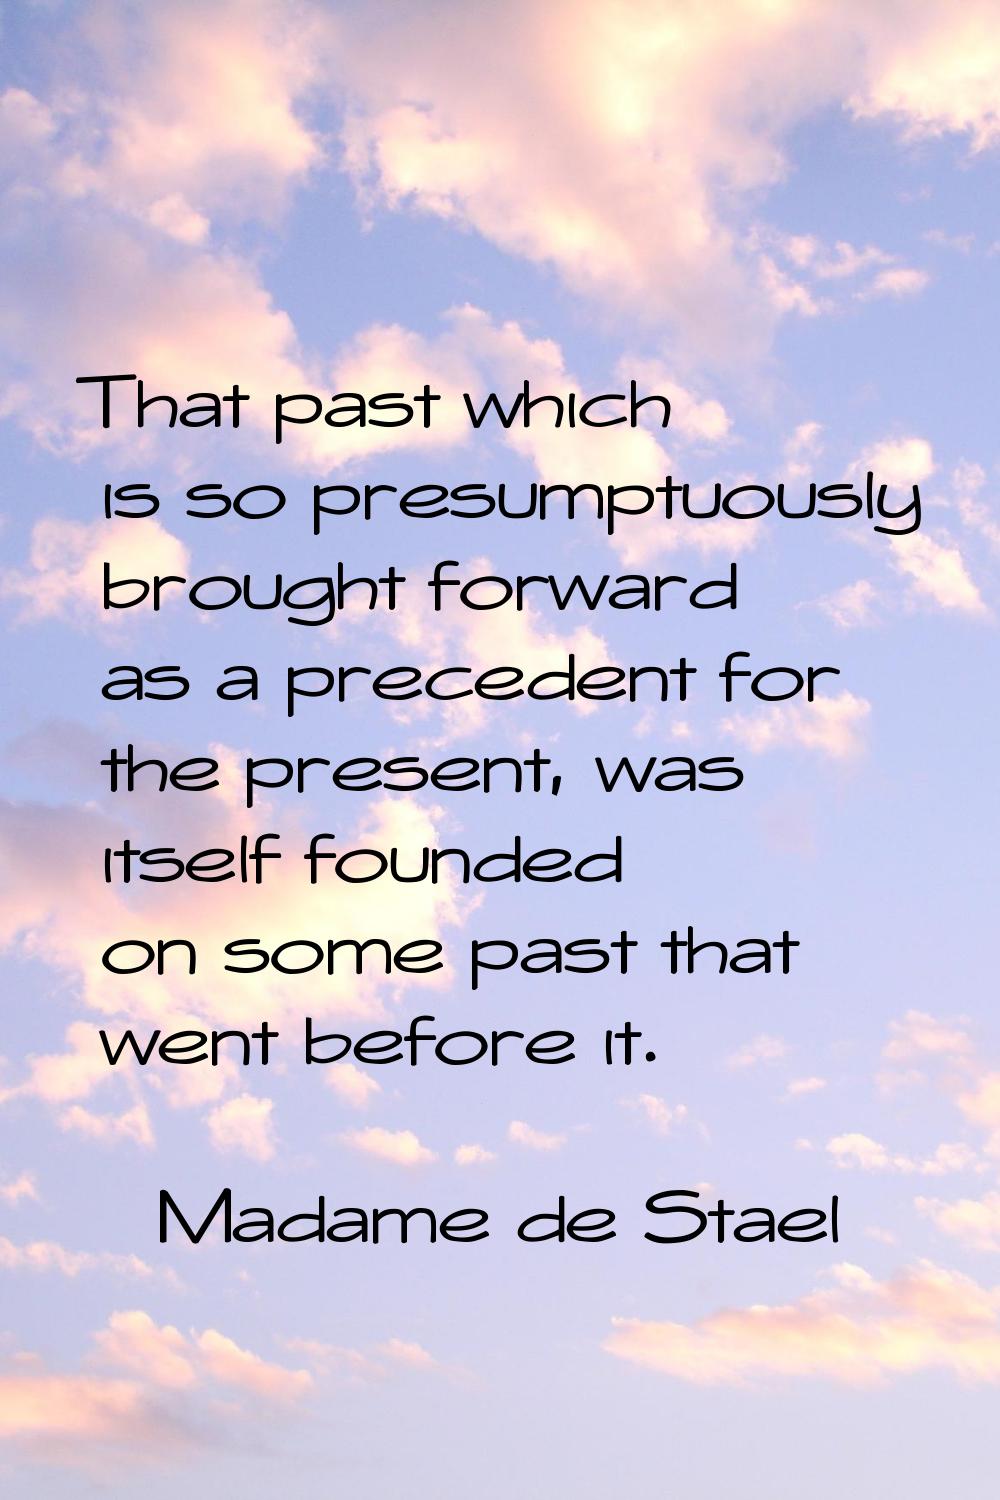 That past which is so presumptuously brought forward as a precedent for the present, was itself fou